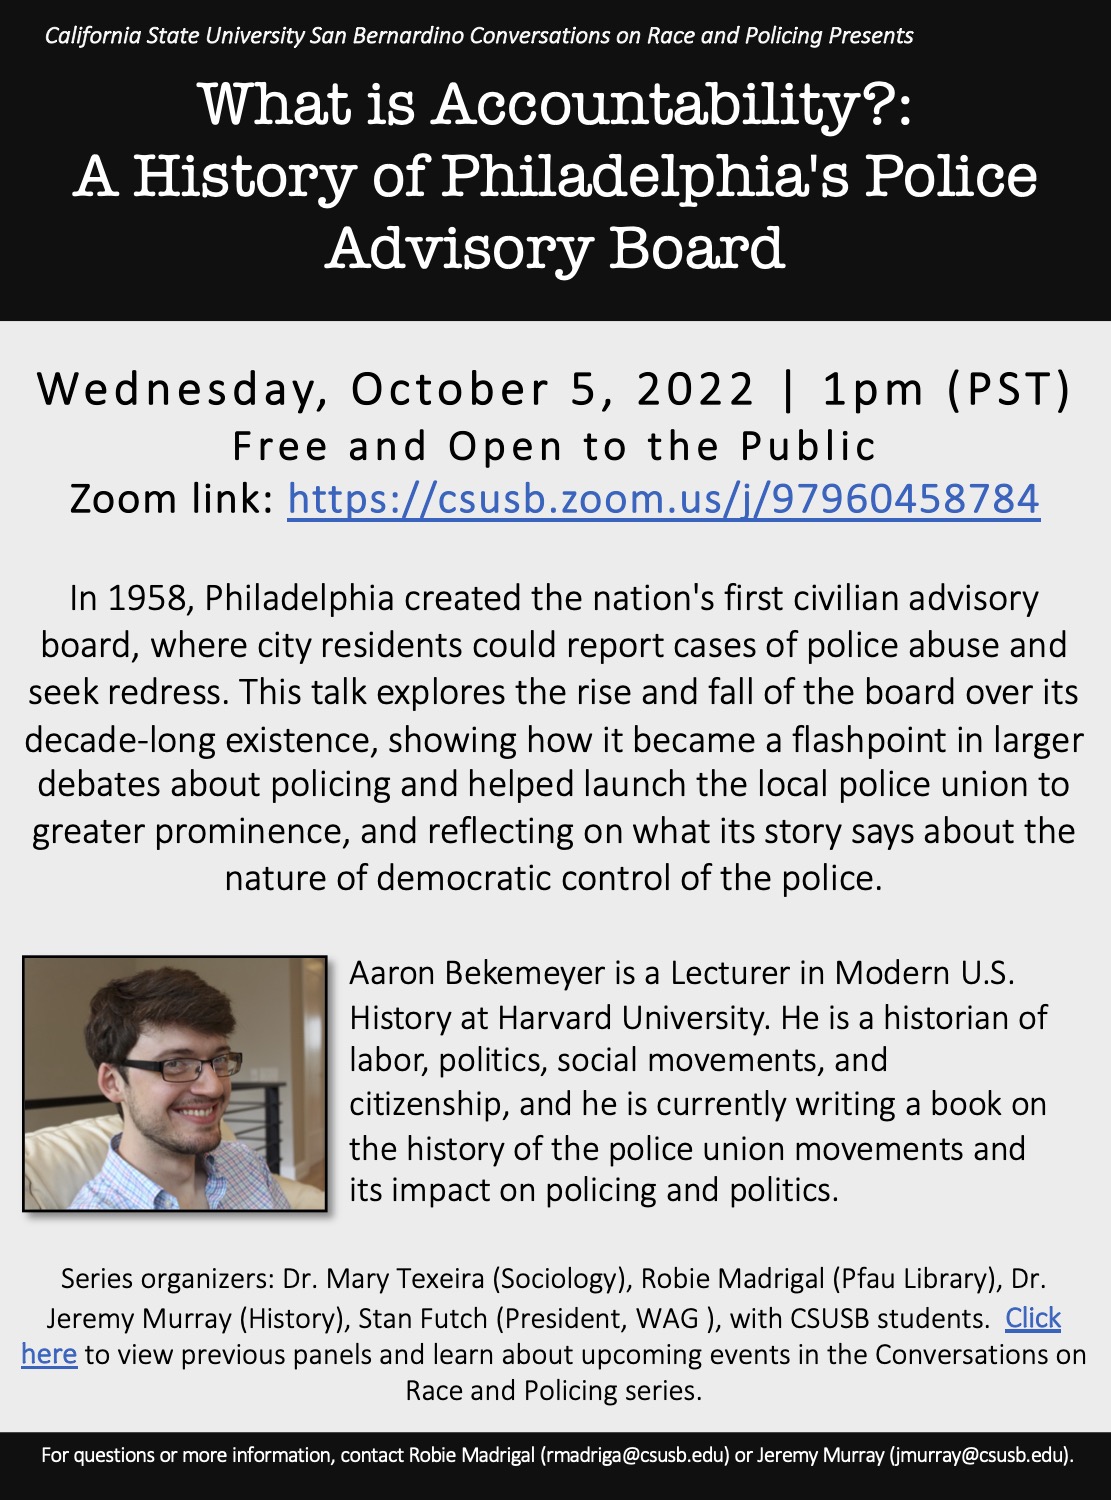 Conversations on Race and Policing event, Oct 5